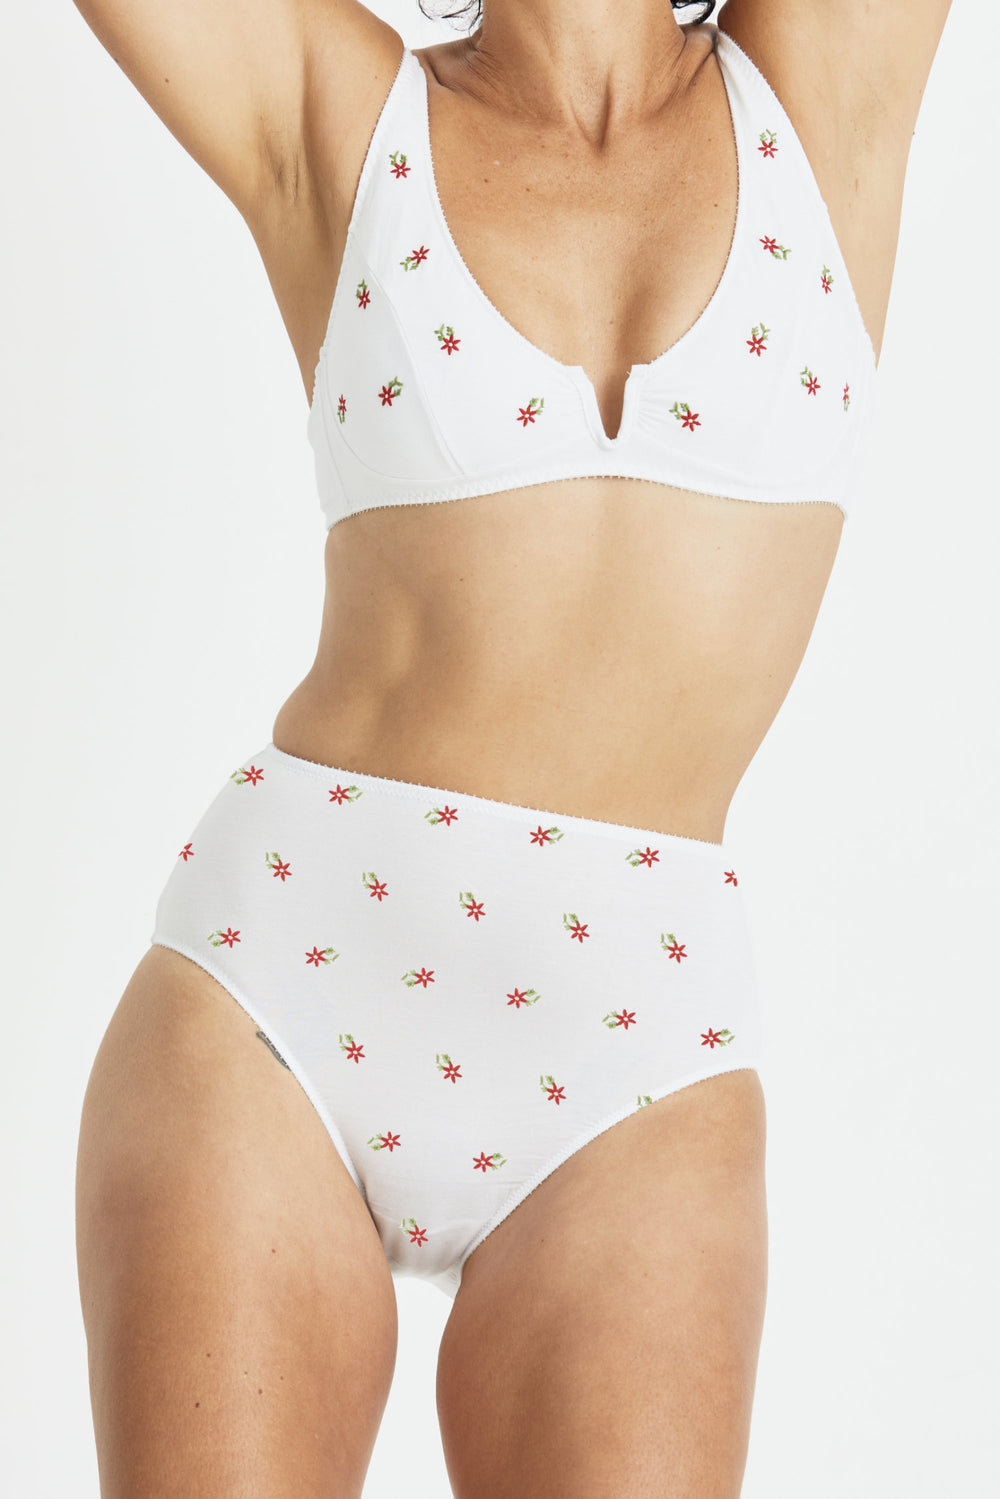 Videris Lingerie high waist embroidered knicker in white TENCEL™ with soft elastics and flattering legline